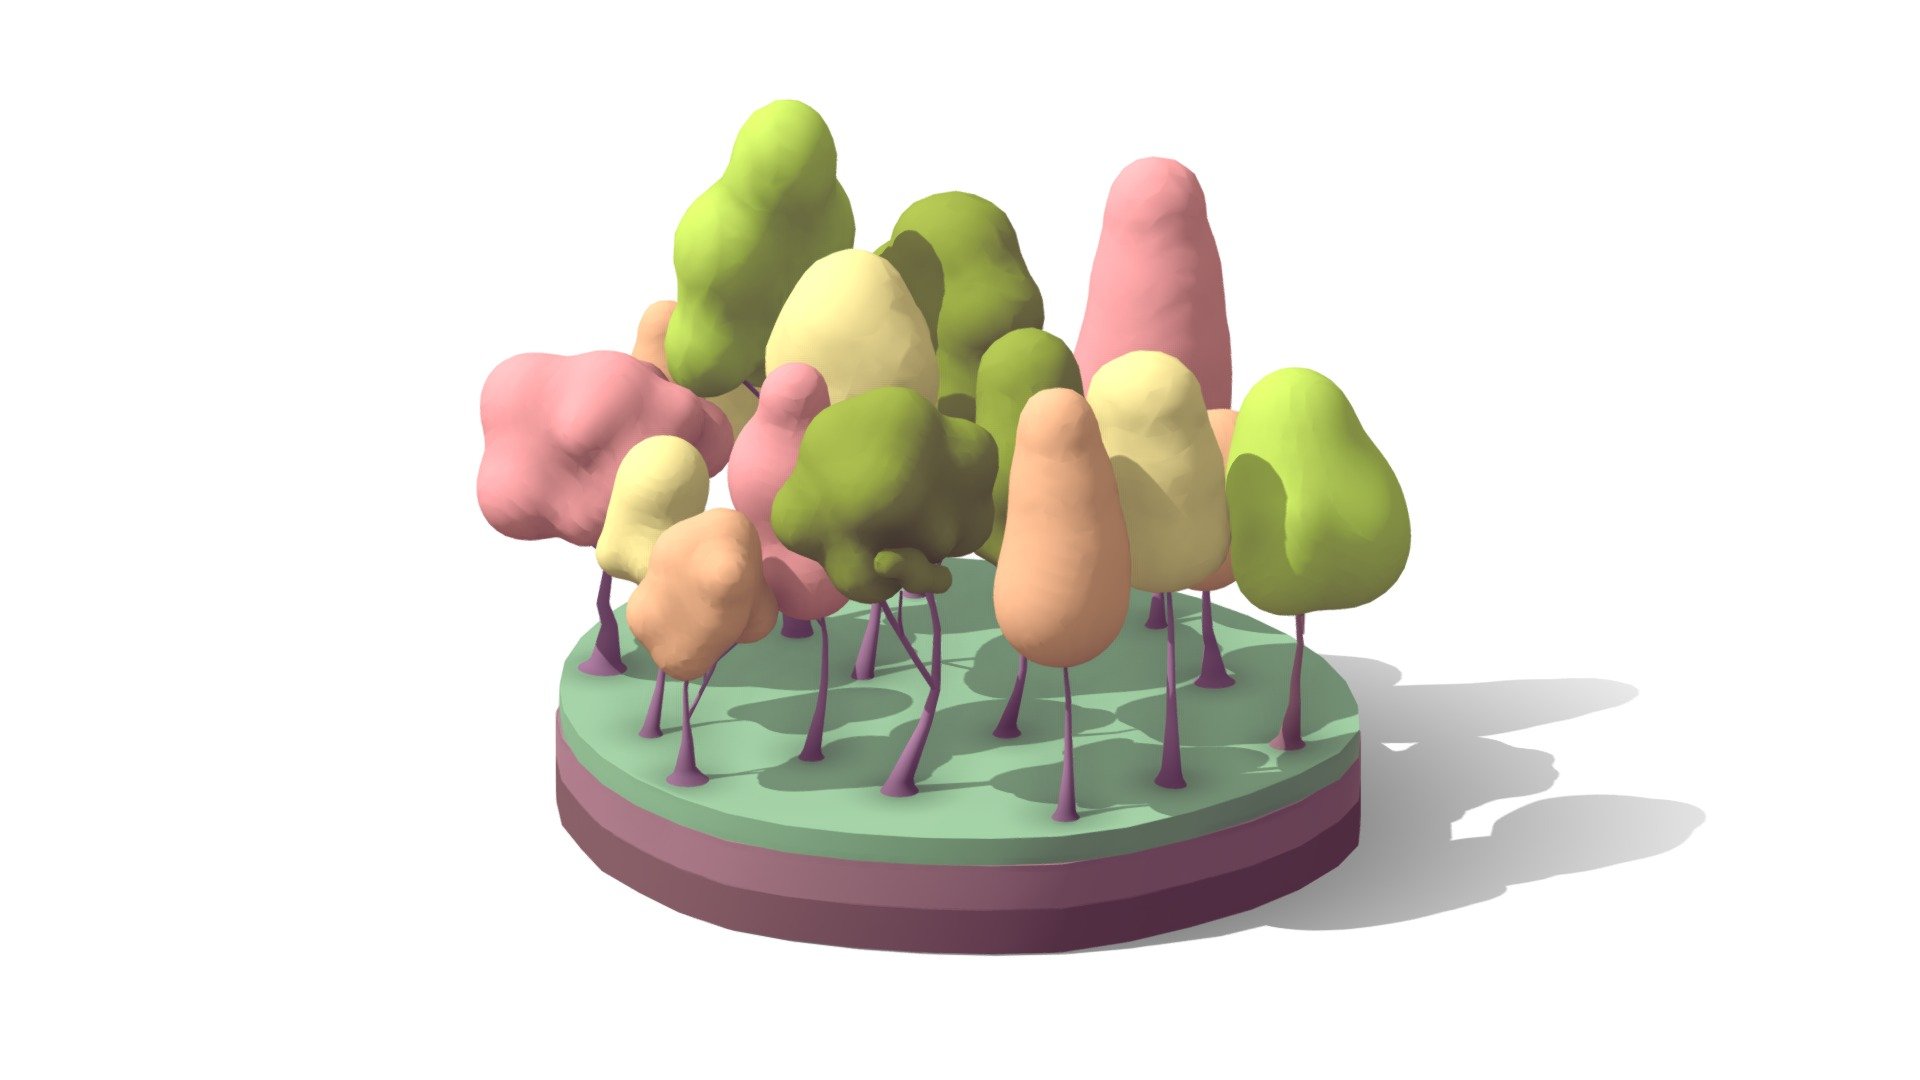 -Bubble Style liquid low poly 3d trees set..Works on Browser, Realtime Render Engines.
- Cartoon Trees Illustration Pack 3d Scene
-  Created on Cinema 4d R17
- Formats: .obj .fbx .c4d .3ds .stl
- 15 Trees
- Procedural Textured
- Game Ready, VR Ready - Cartoon Low Poly Bubble Trees Pack - Buy Royalty Free 3D model by antonmoek 3d model